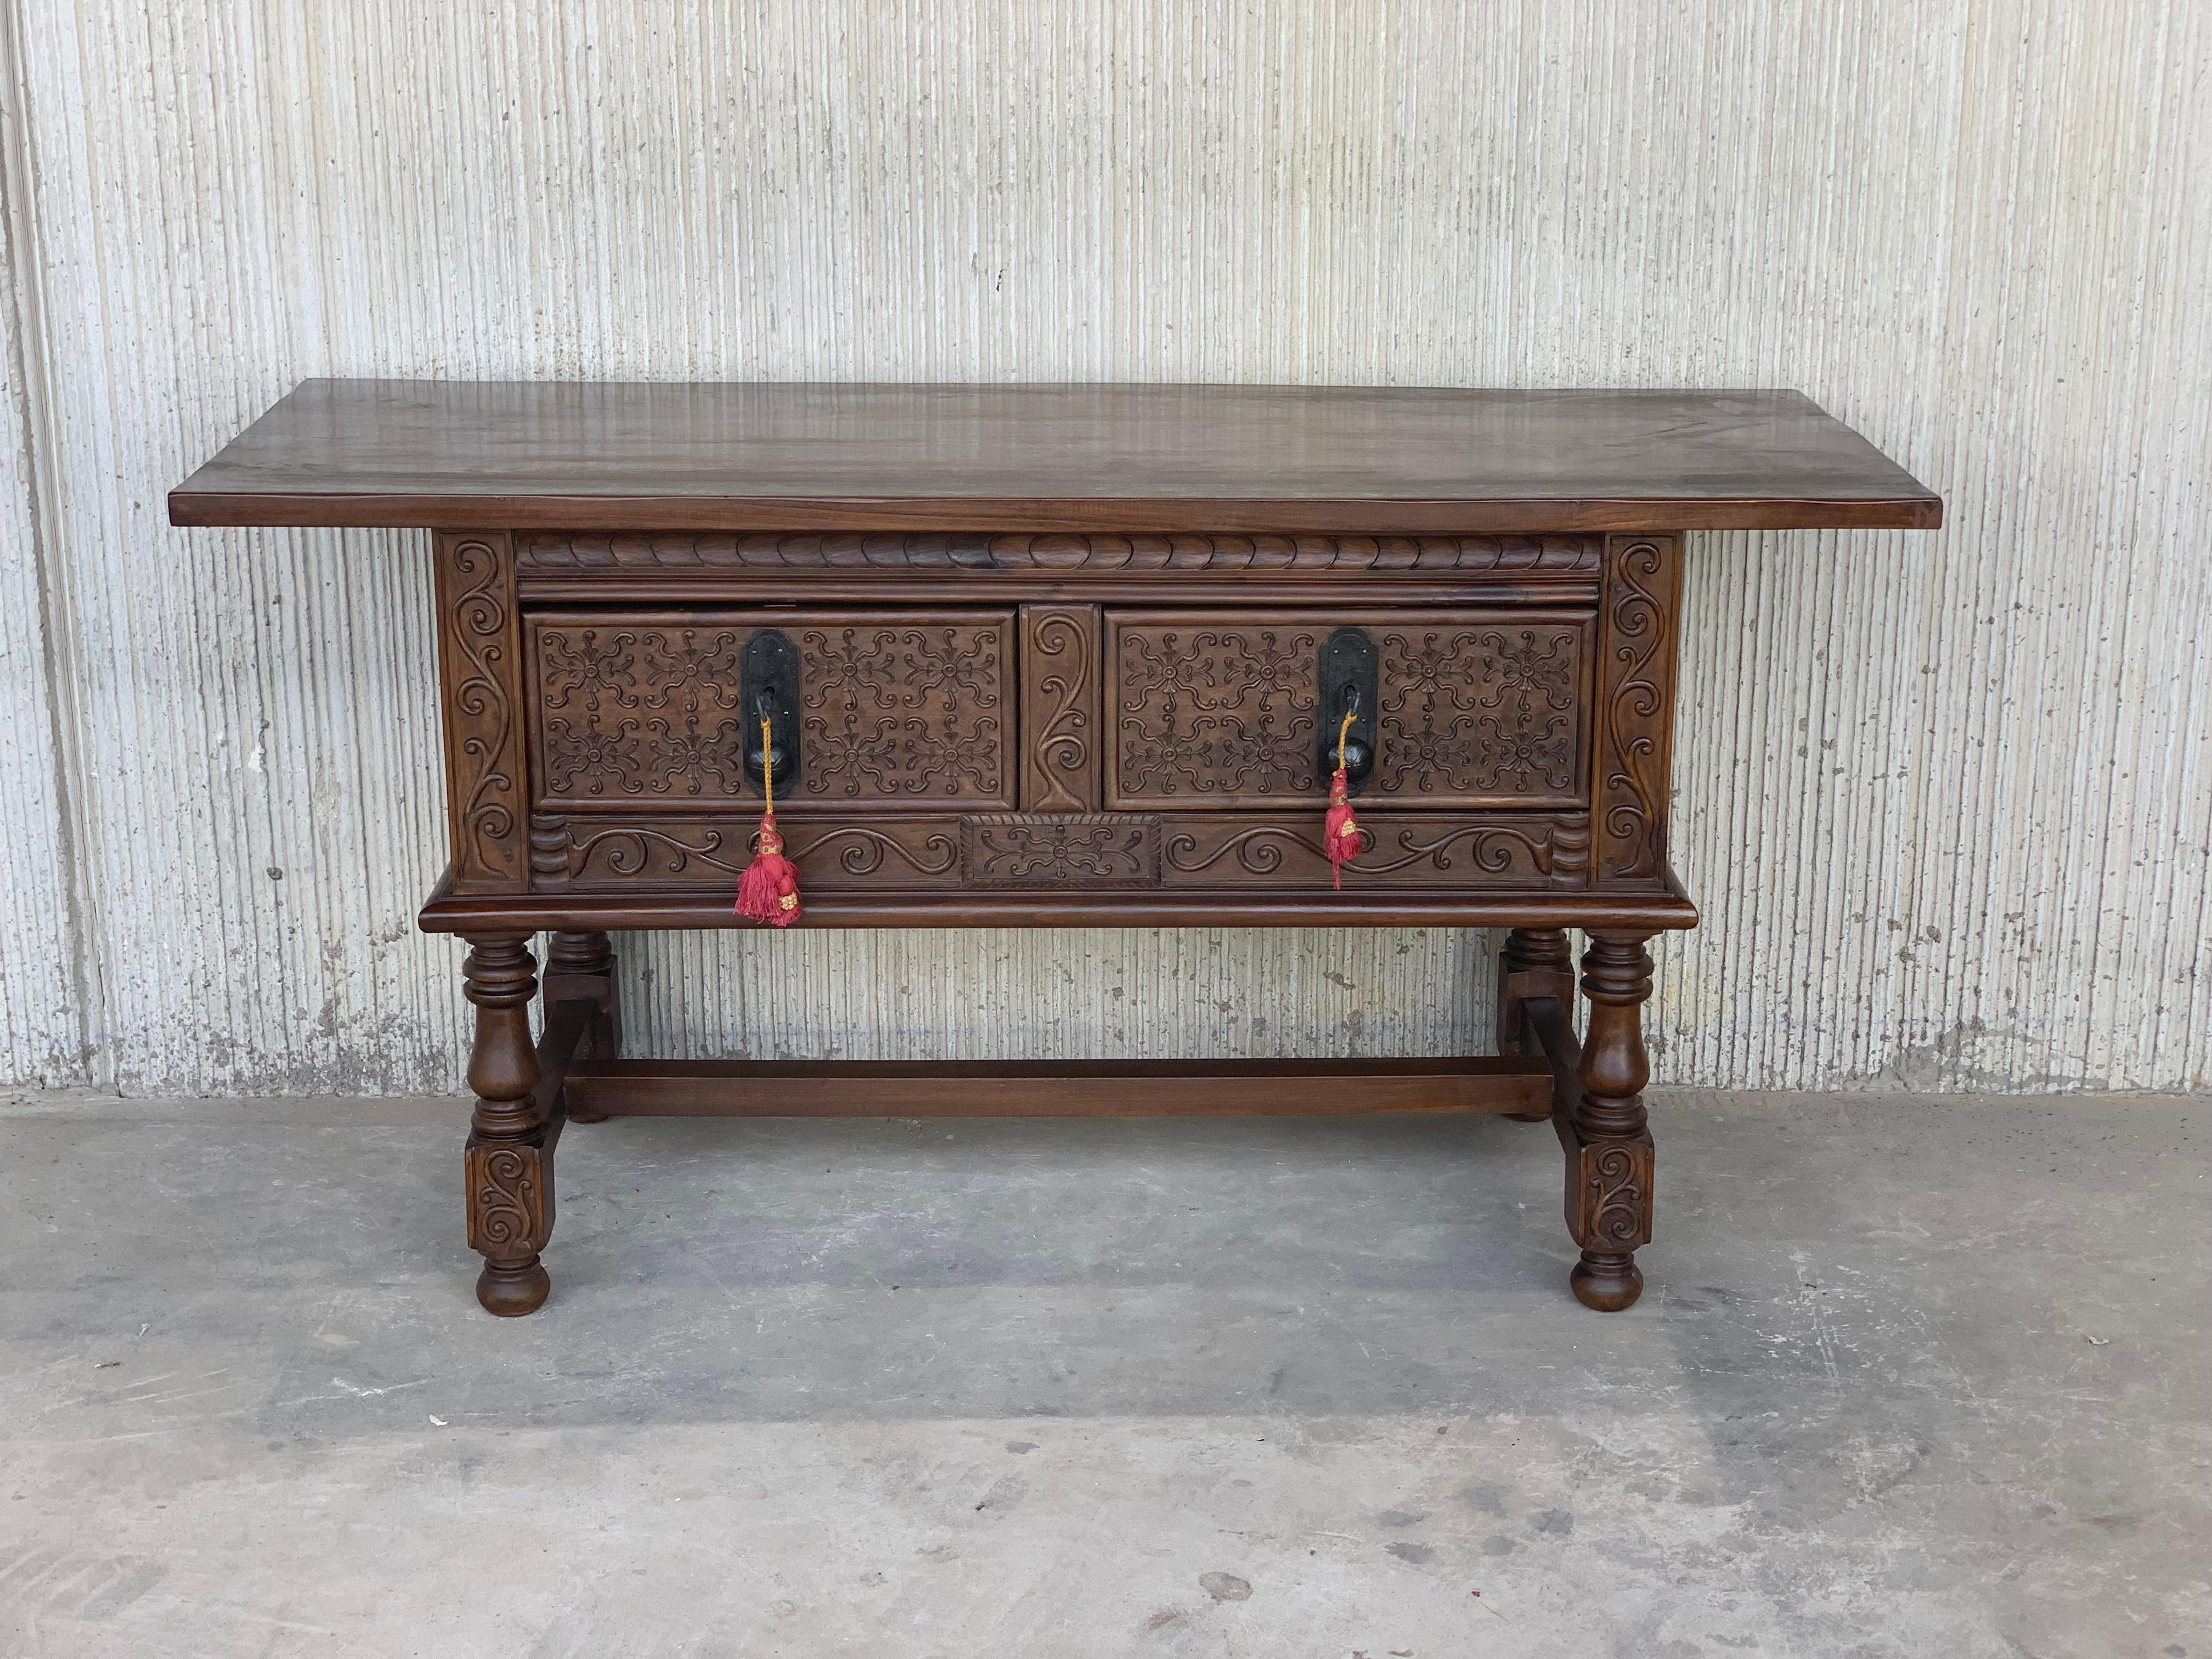 Baroque Revival Spanish Console Chest Table with Two Carved Drawers and Original Hardware